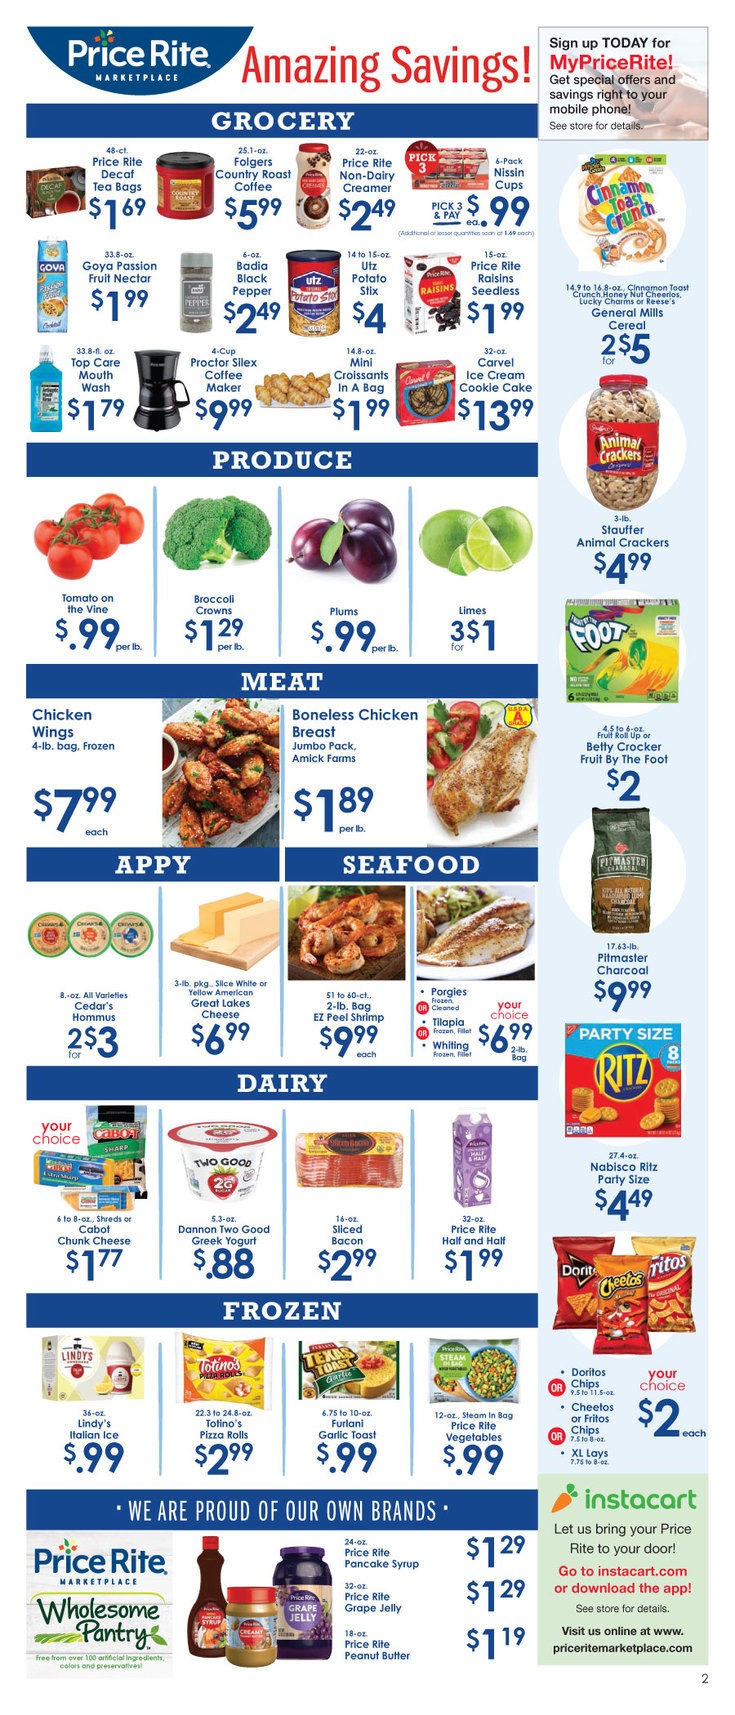 Price Rite Weekly Ad from August 16